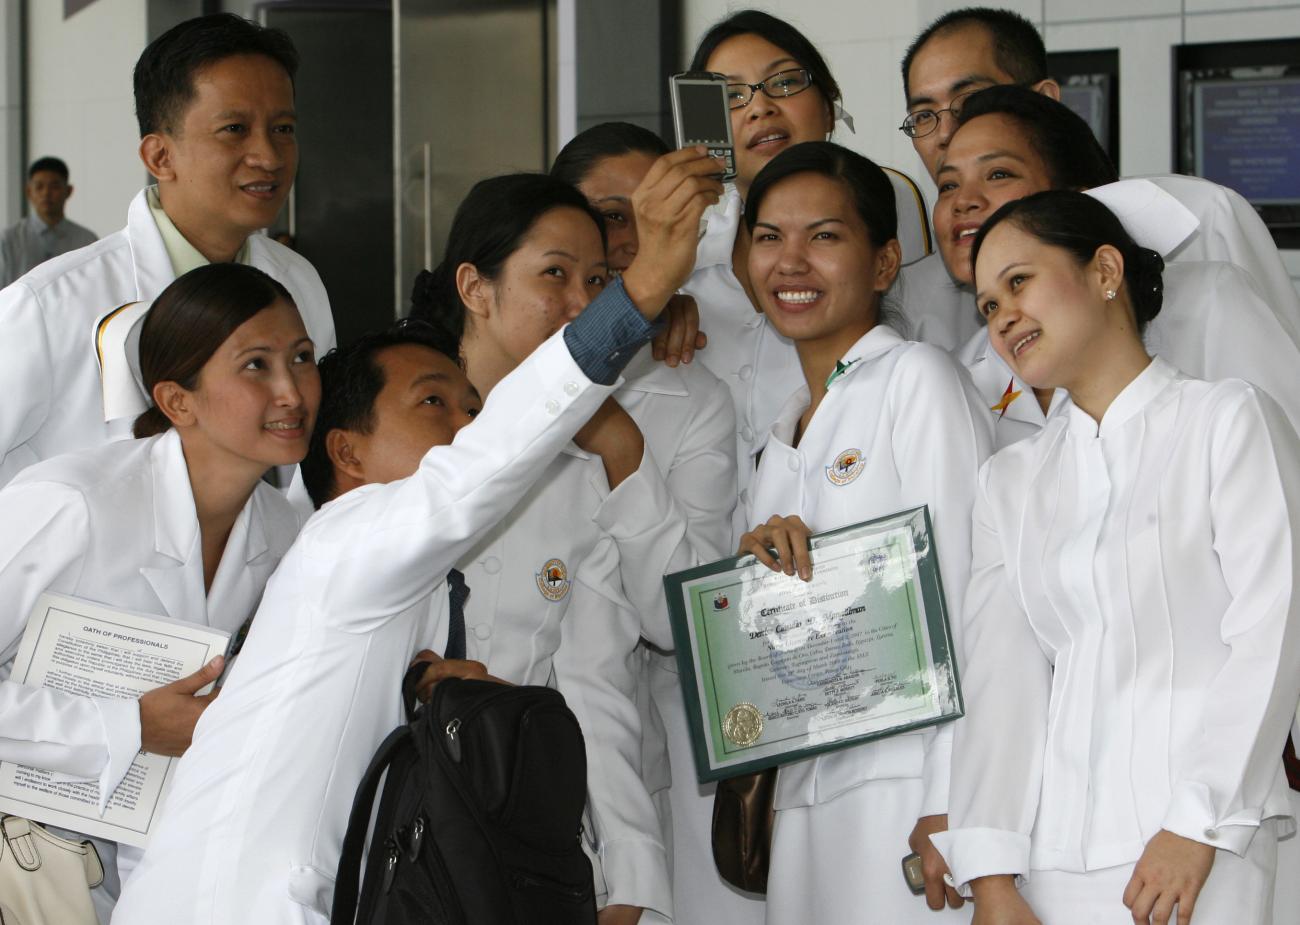 Newly-qualified nurses in white coats take a selfie with their diplomas in Manila, Philippines on March 17, 2008.